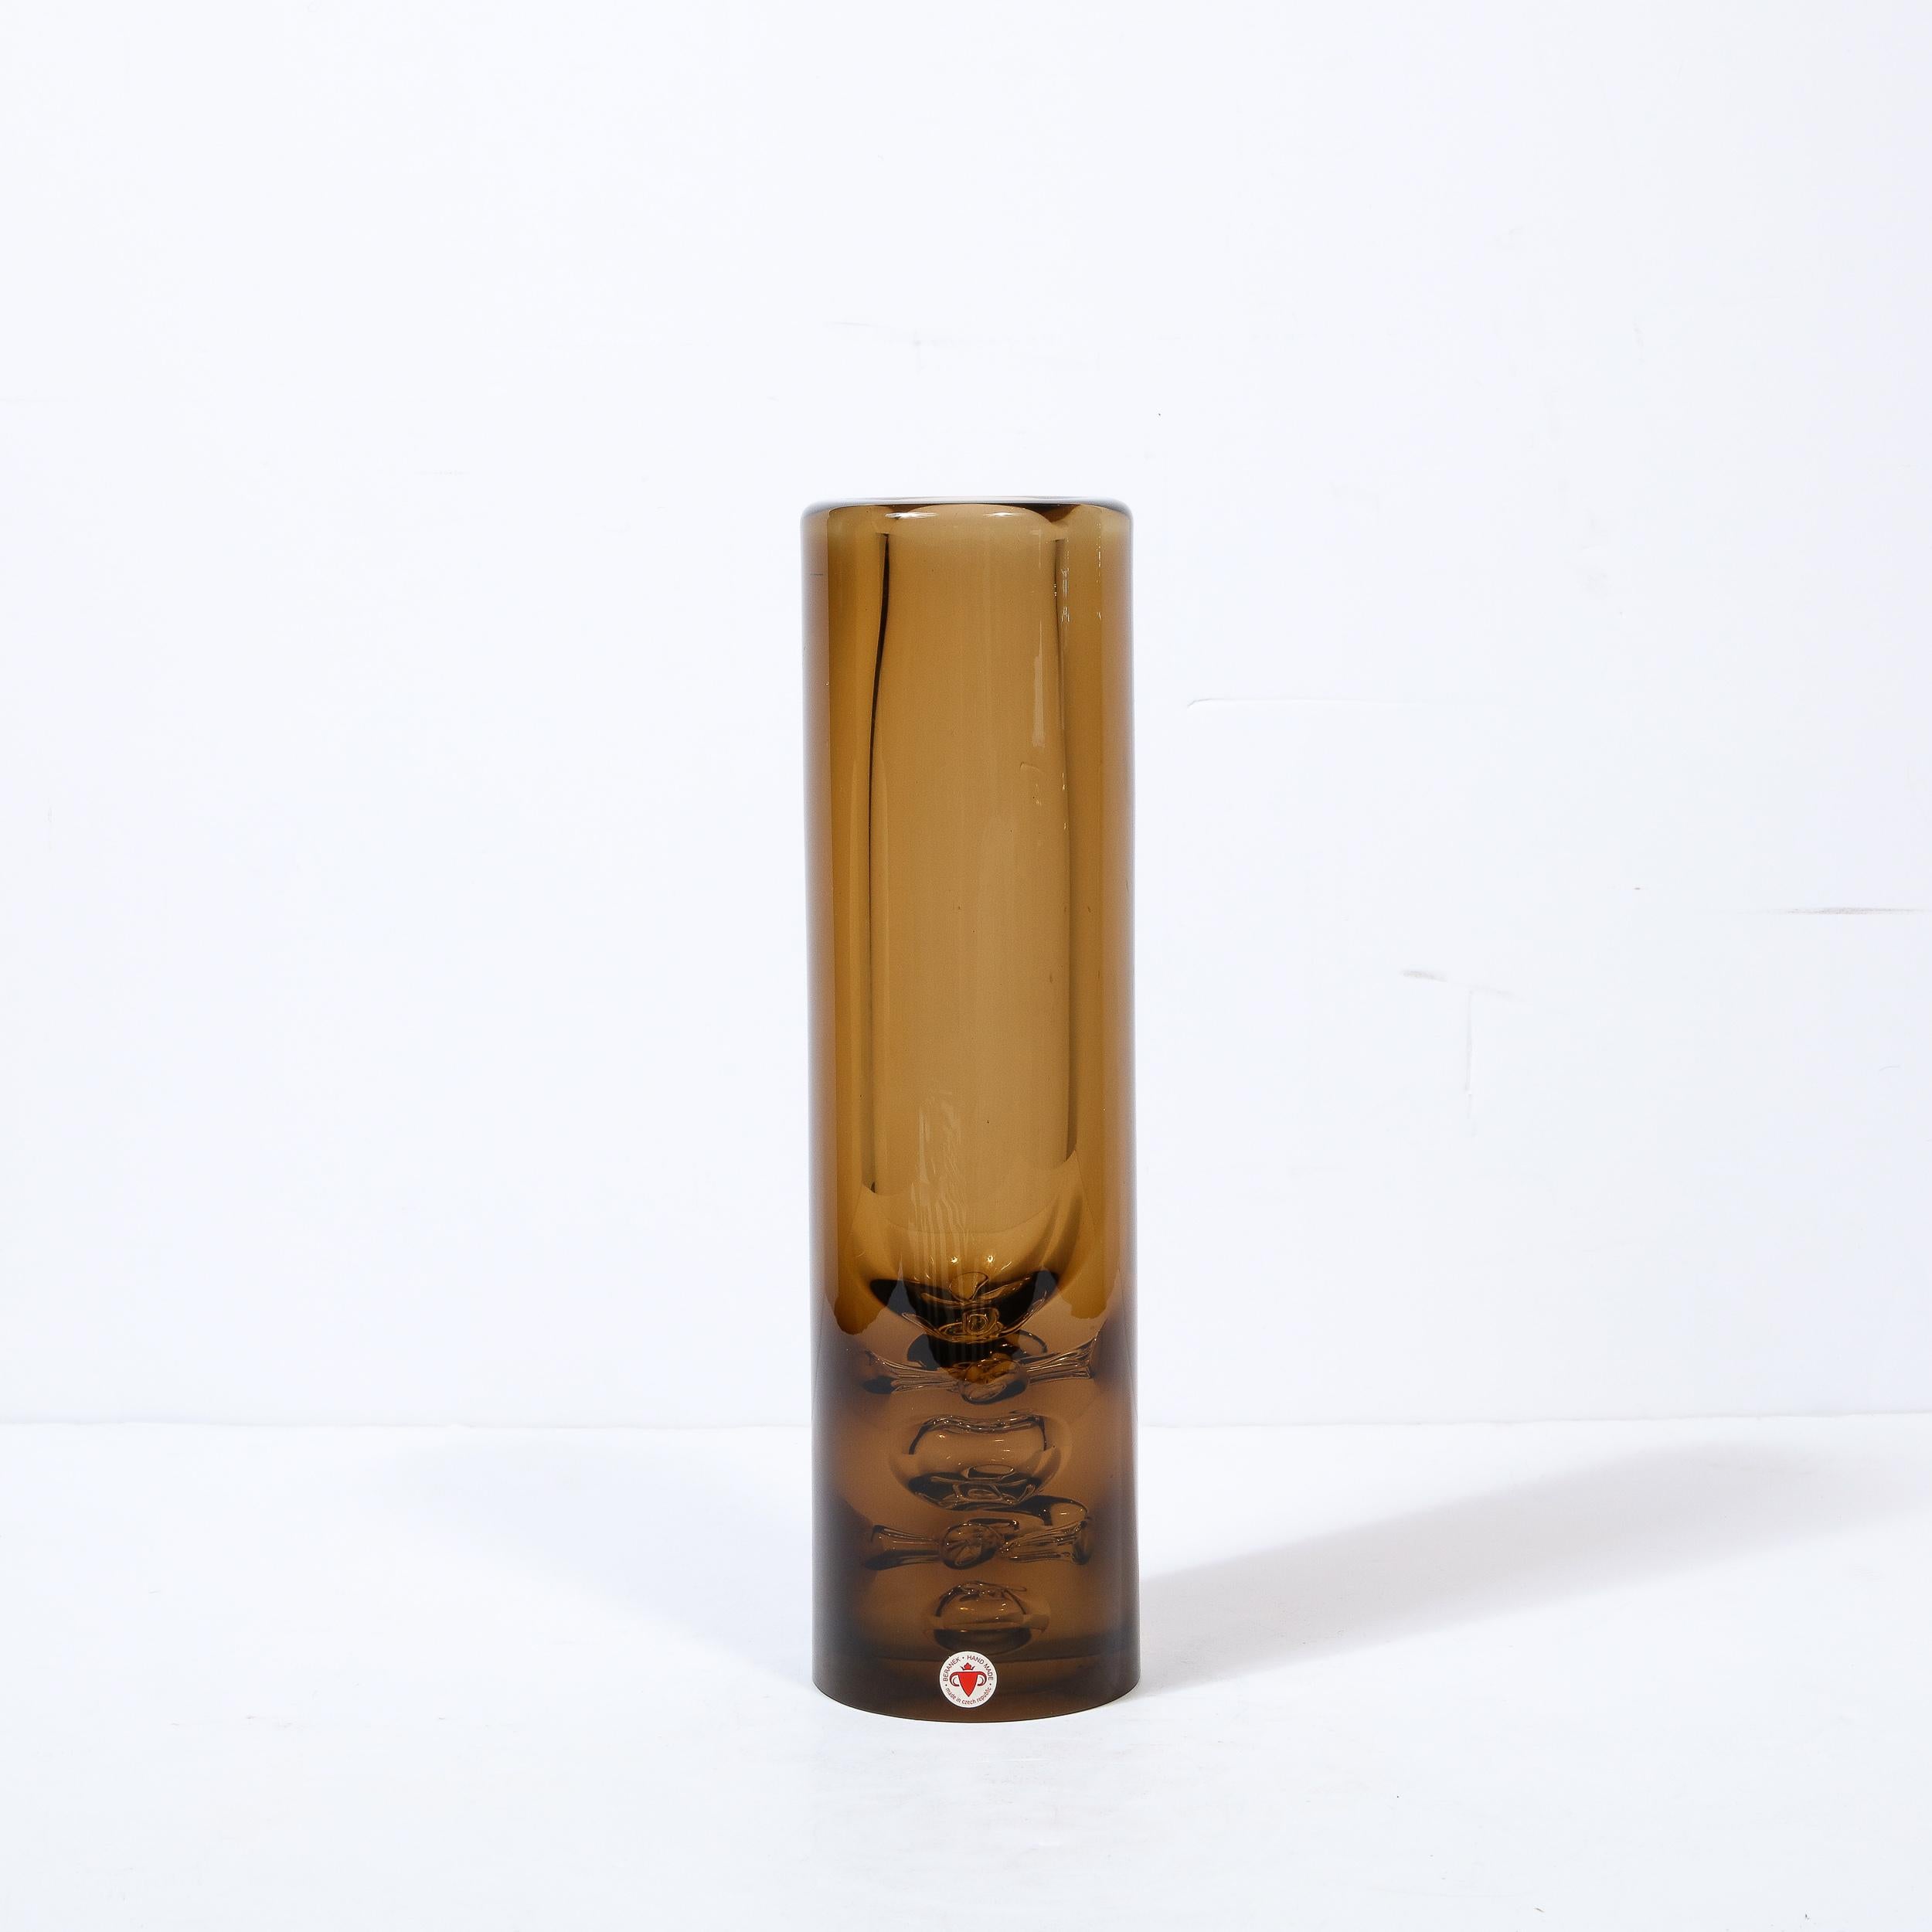 This beautiful Mid-Century Modern hand blown glass vase was realized by the esteemed maker Baranek in the Czechoslovakia circa 1960. It features a cylindrical body in translucent glass in a sumptuous smoked amber hue with prominent Murines